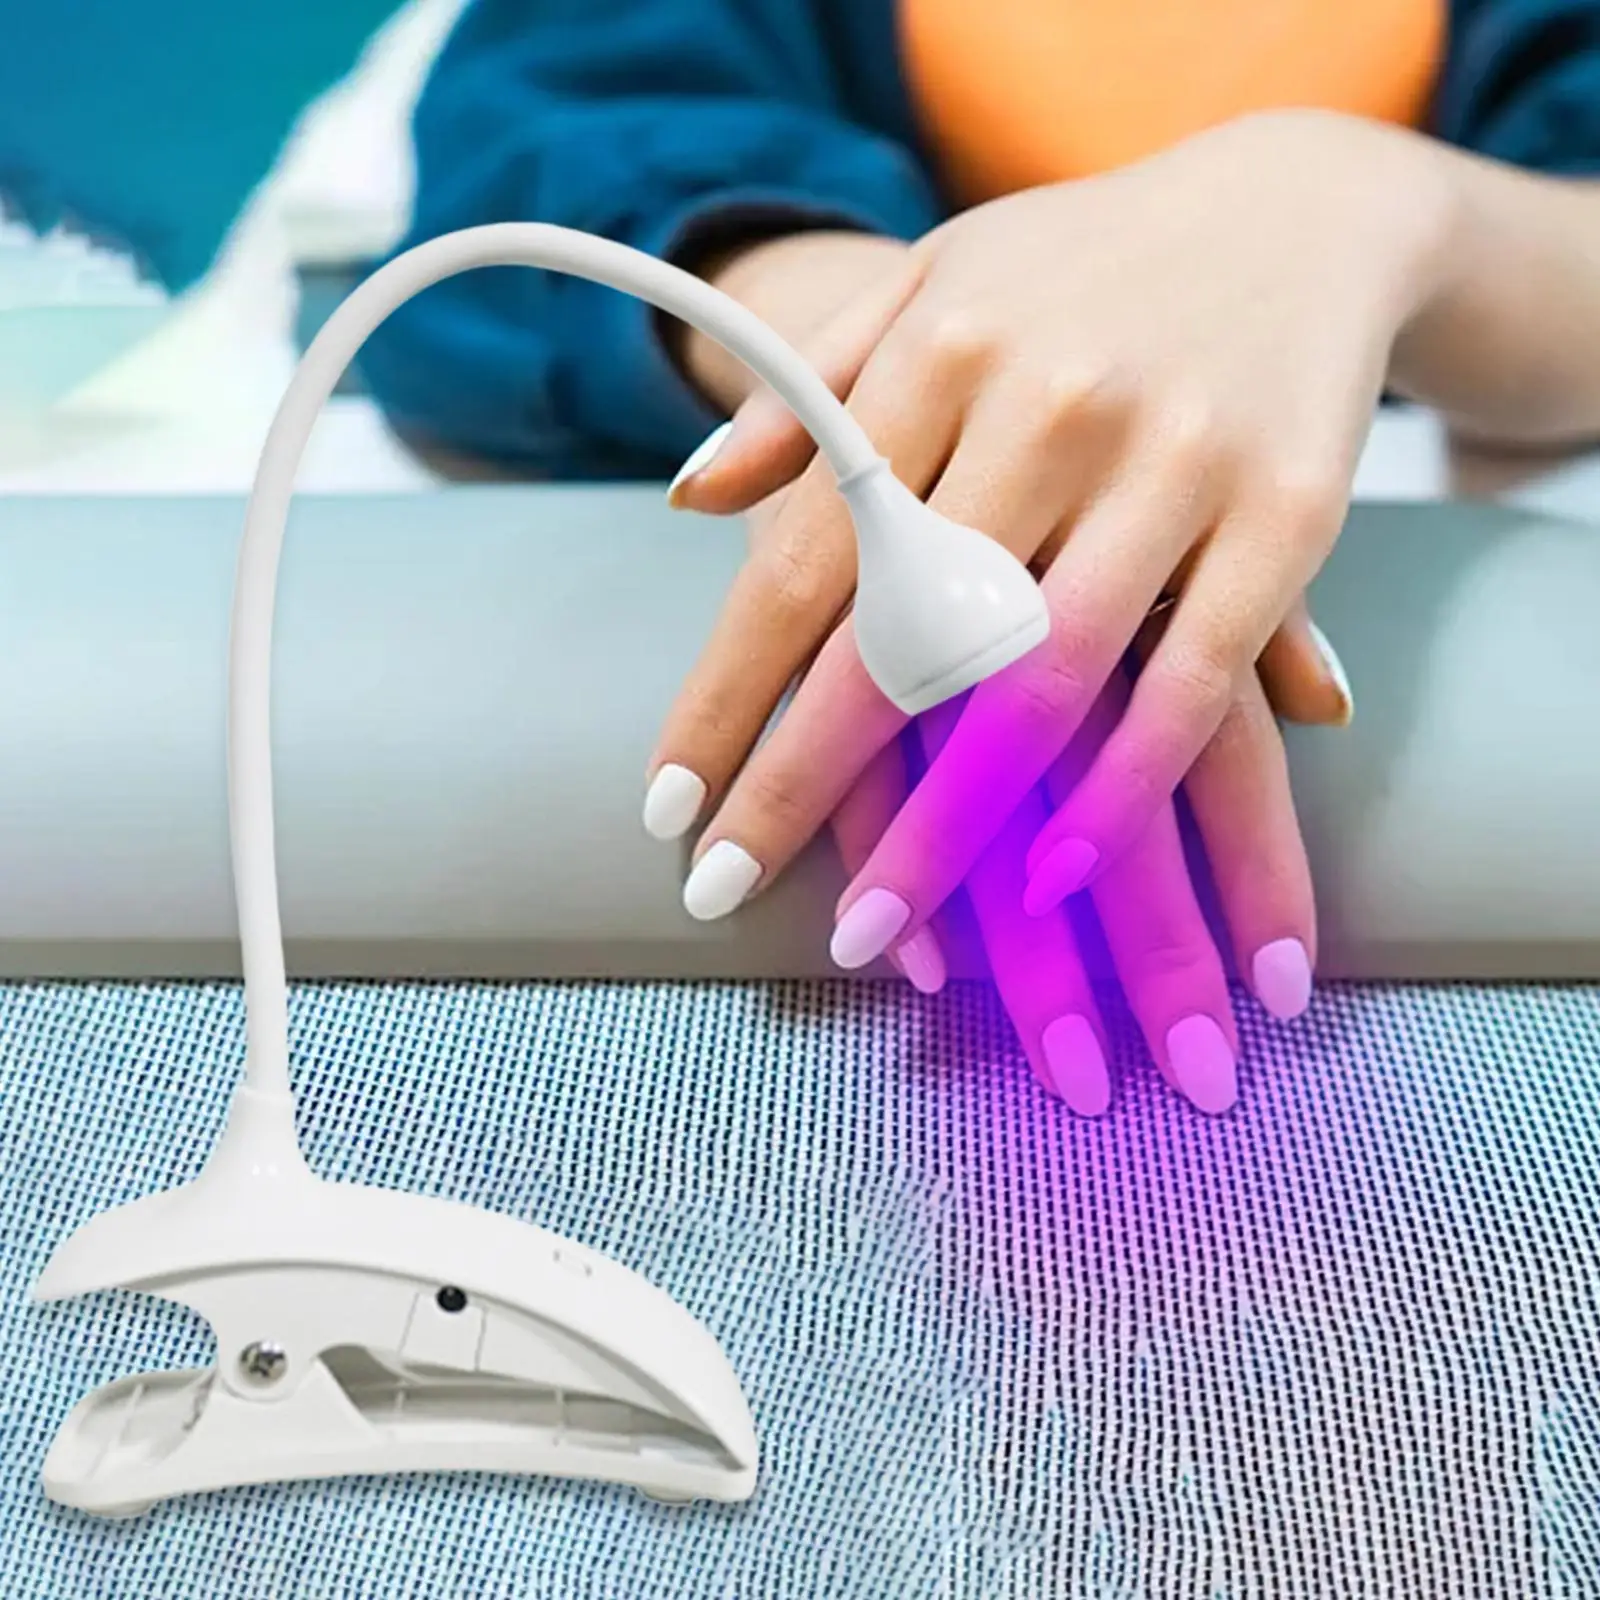 Manicure Lamp 5W 360 Degree Adjustable with Clamp Compact Professional Portable Nail Dryer Lamp Nail Lamp for Single Finger